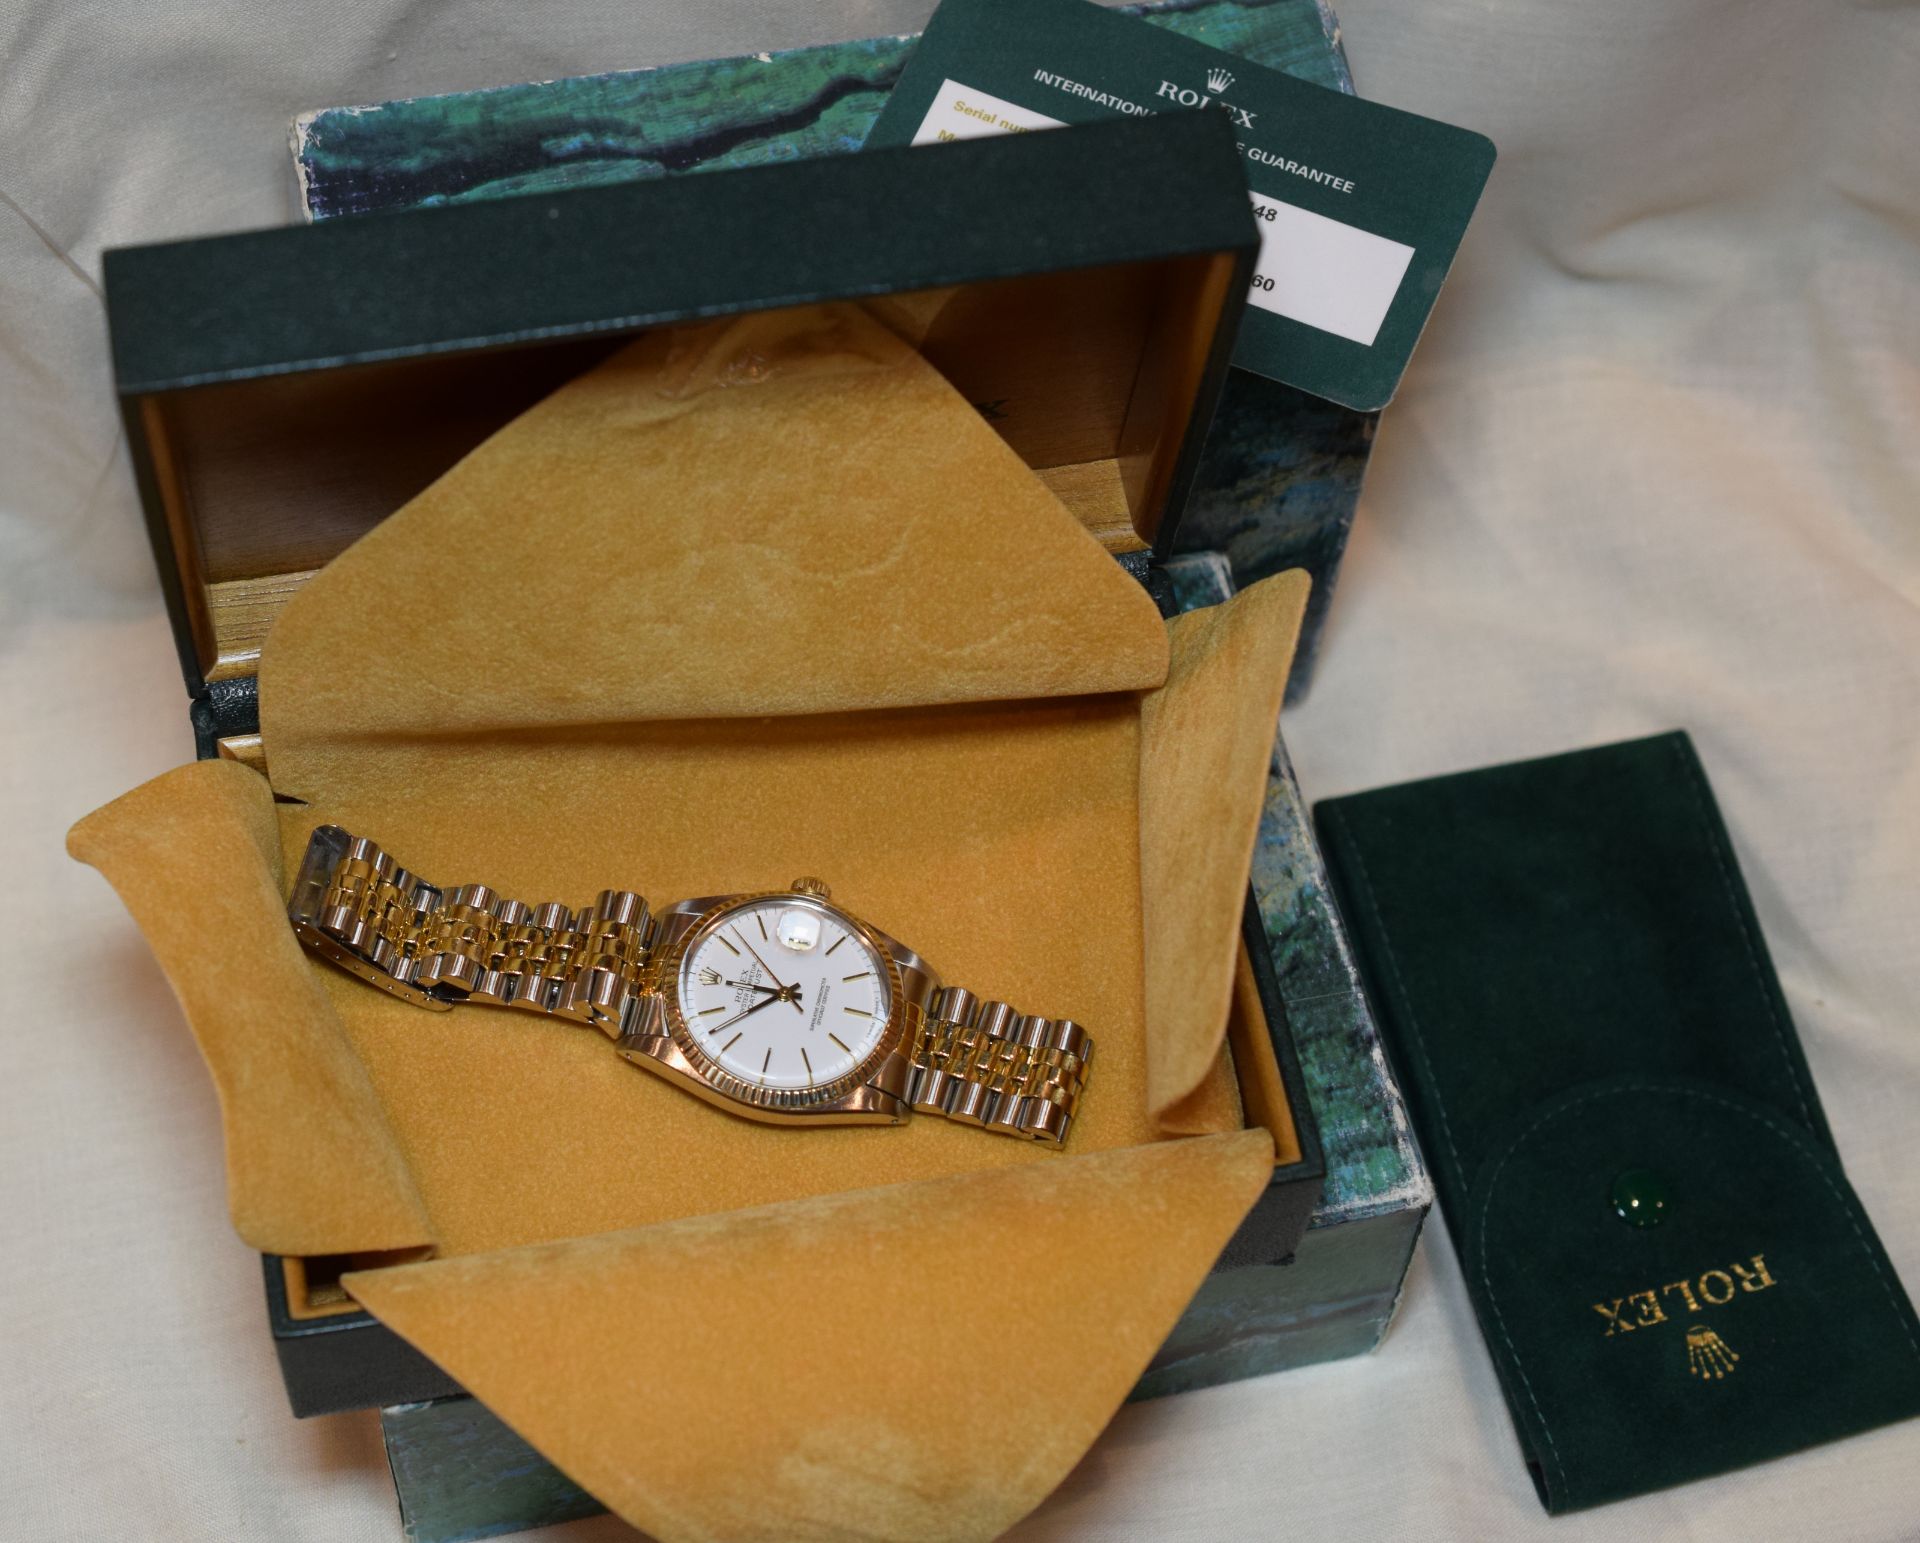 Rolex Oyster Perpetual Datejust 18ct Gold And Stainless Steel Chronometer ***reserve lowered*** - Image 3 of 9